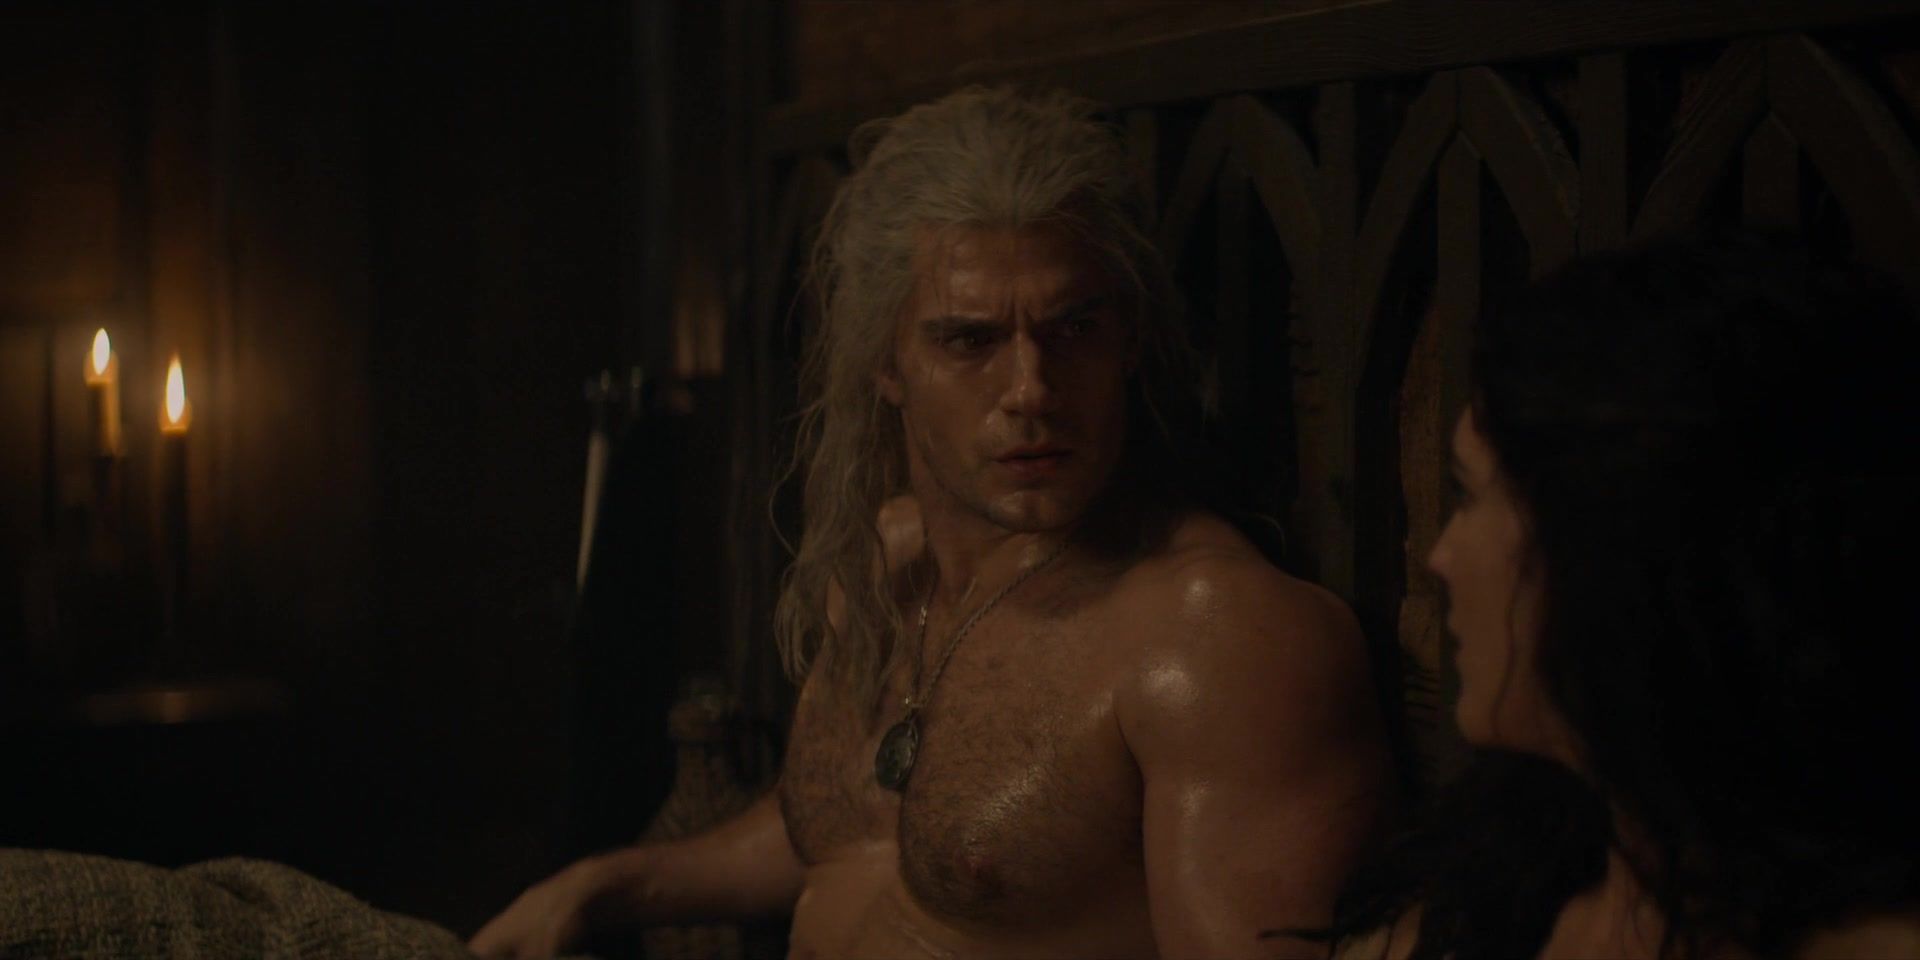 Emo Gay Nude Imogen Daines - The Witcher s01e03 (2019) Freak - 1